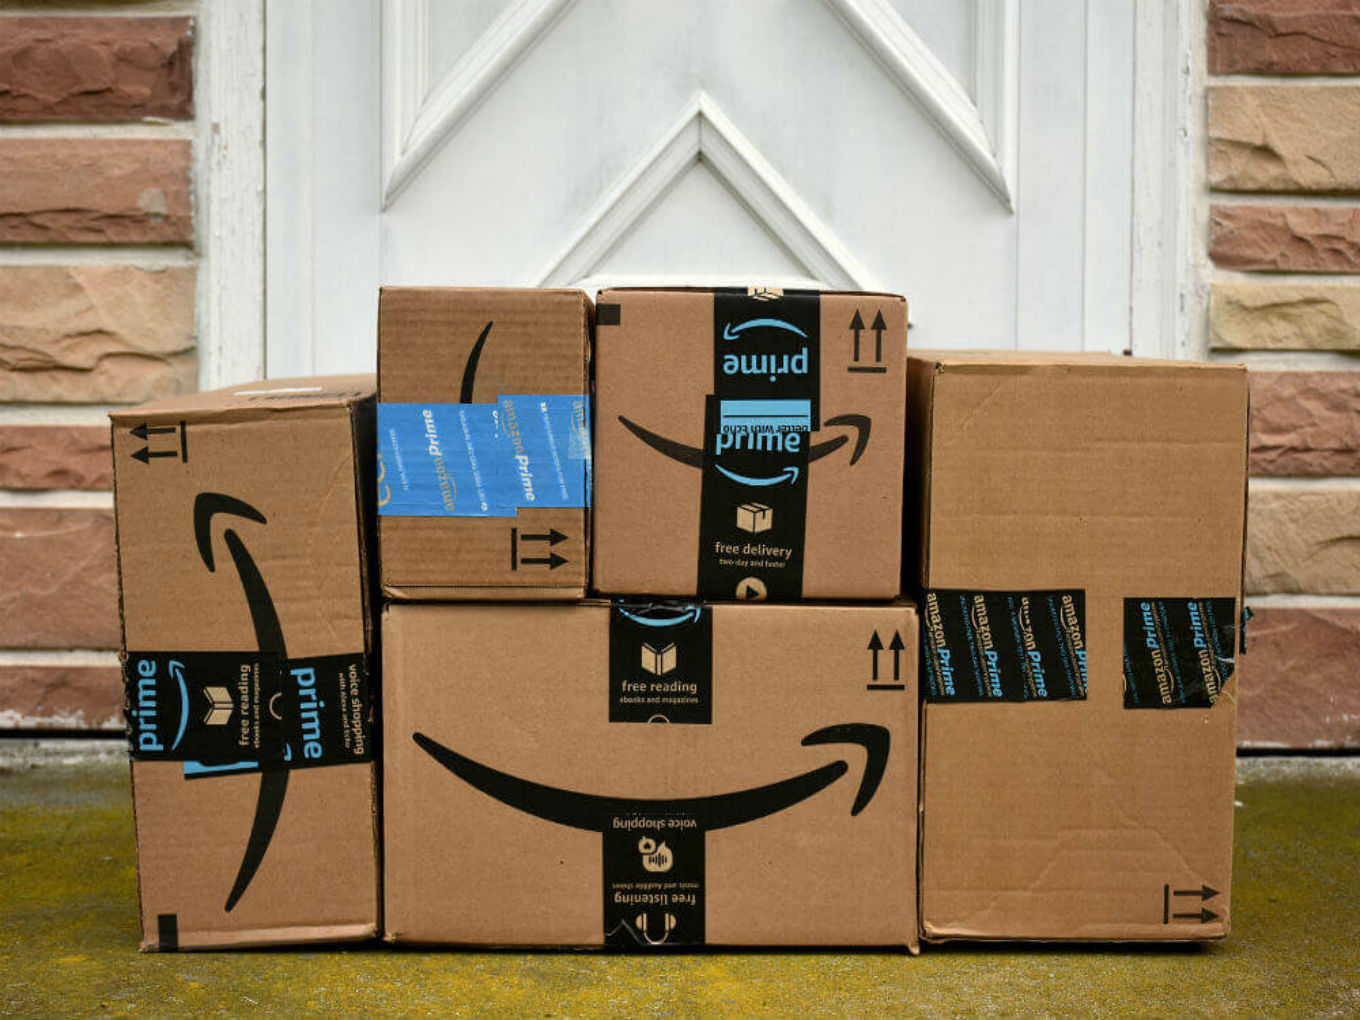 Amazon Plans To Leverage Prime Benefits For Offline Expansion